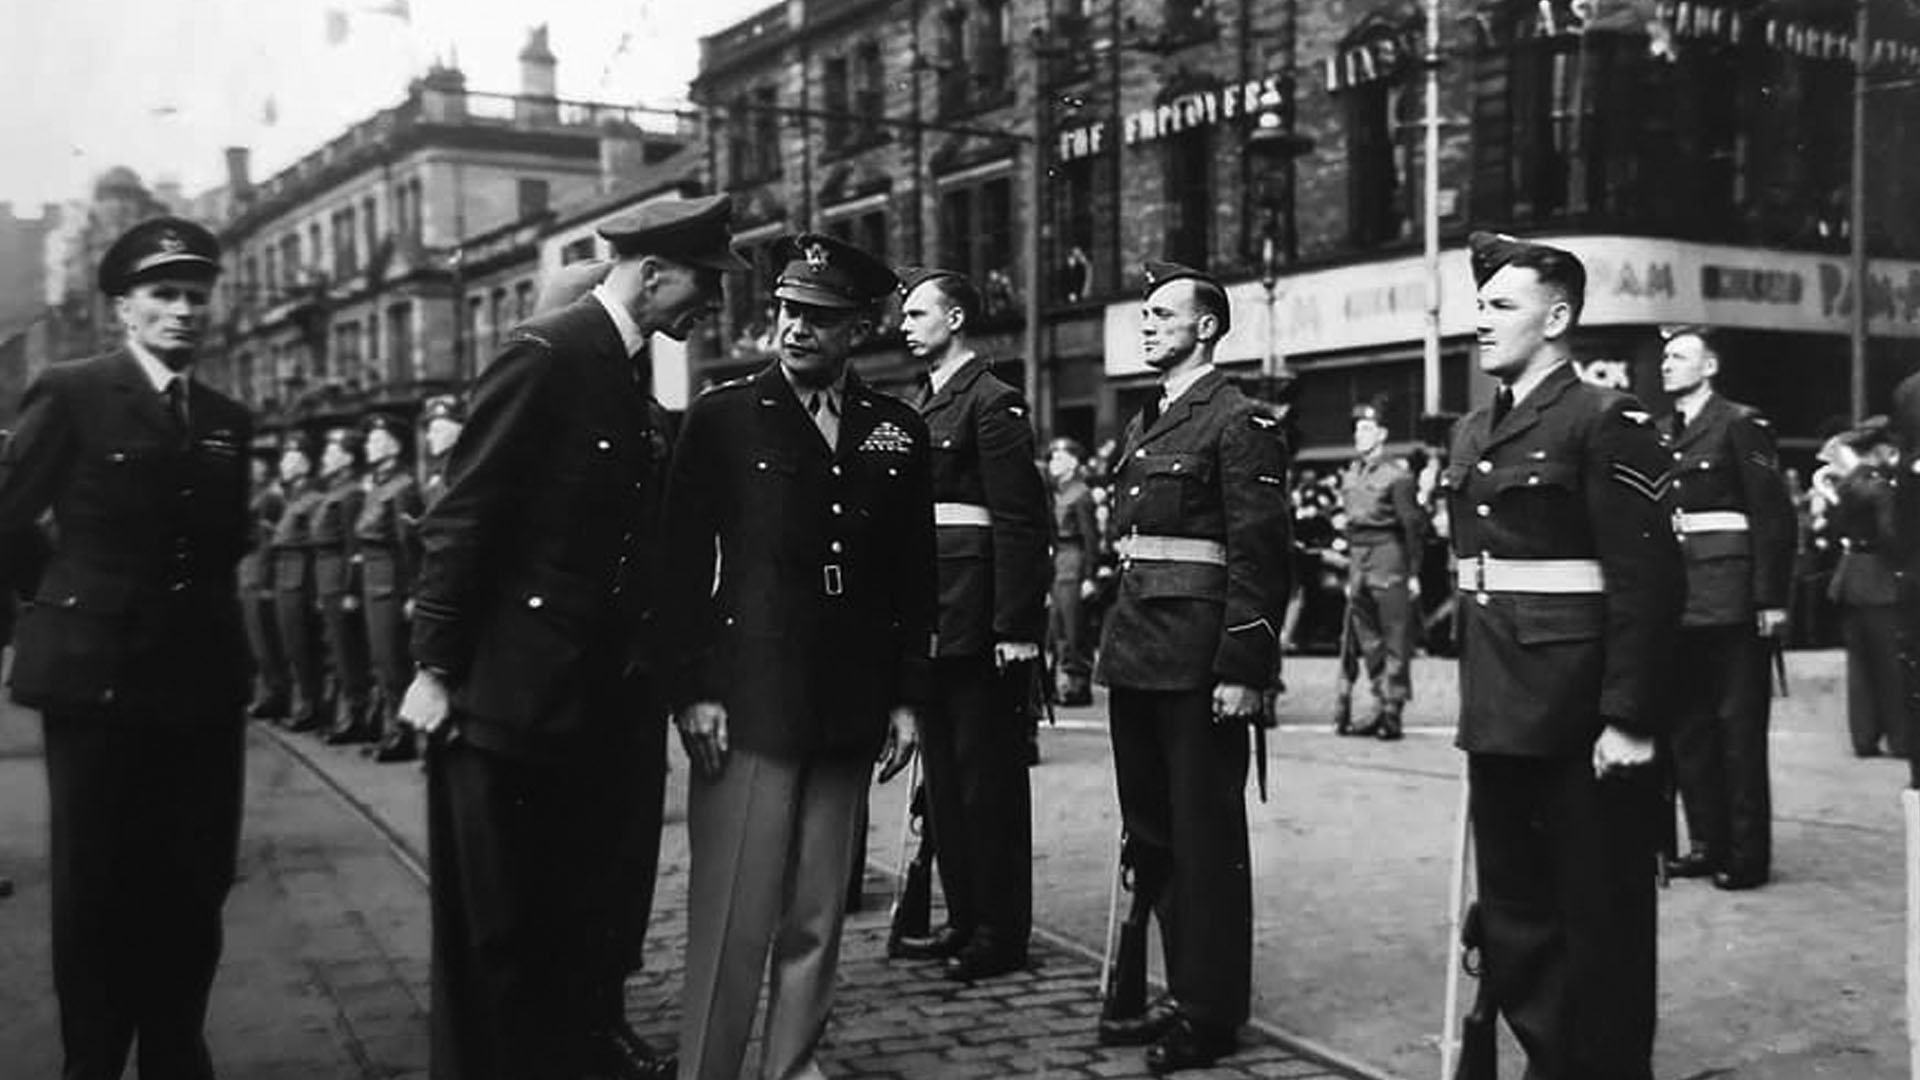 General Dwight D. Eisenhower along with Air Commodore A.R. Churchman, and Flight Lieutenant A. Potts inspect military personnel on Donegall Square North near Belfast City Hall.